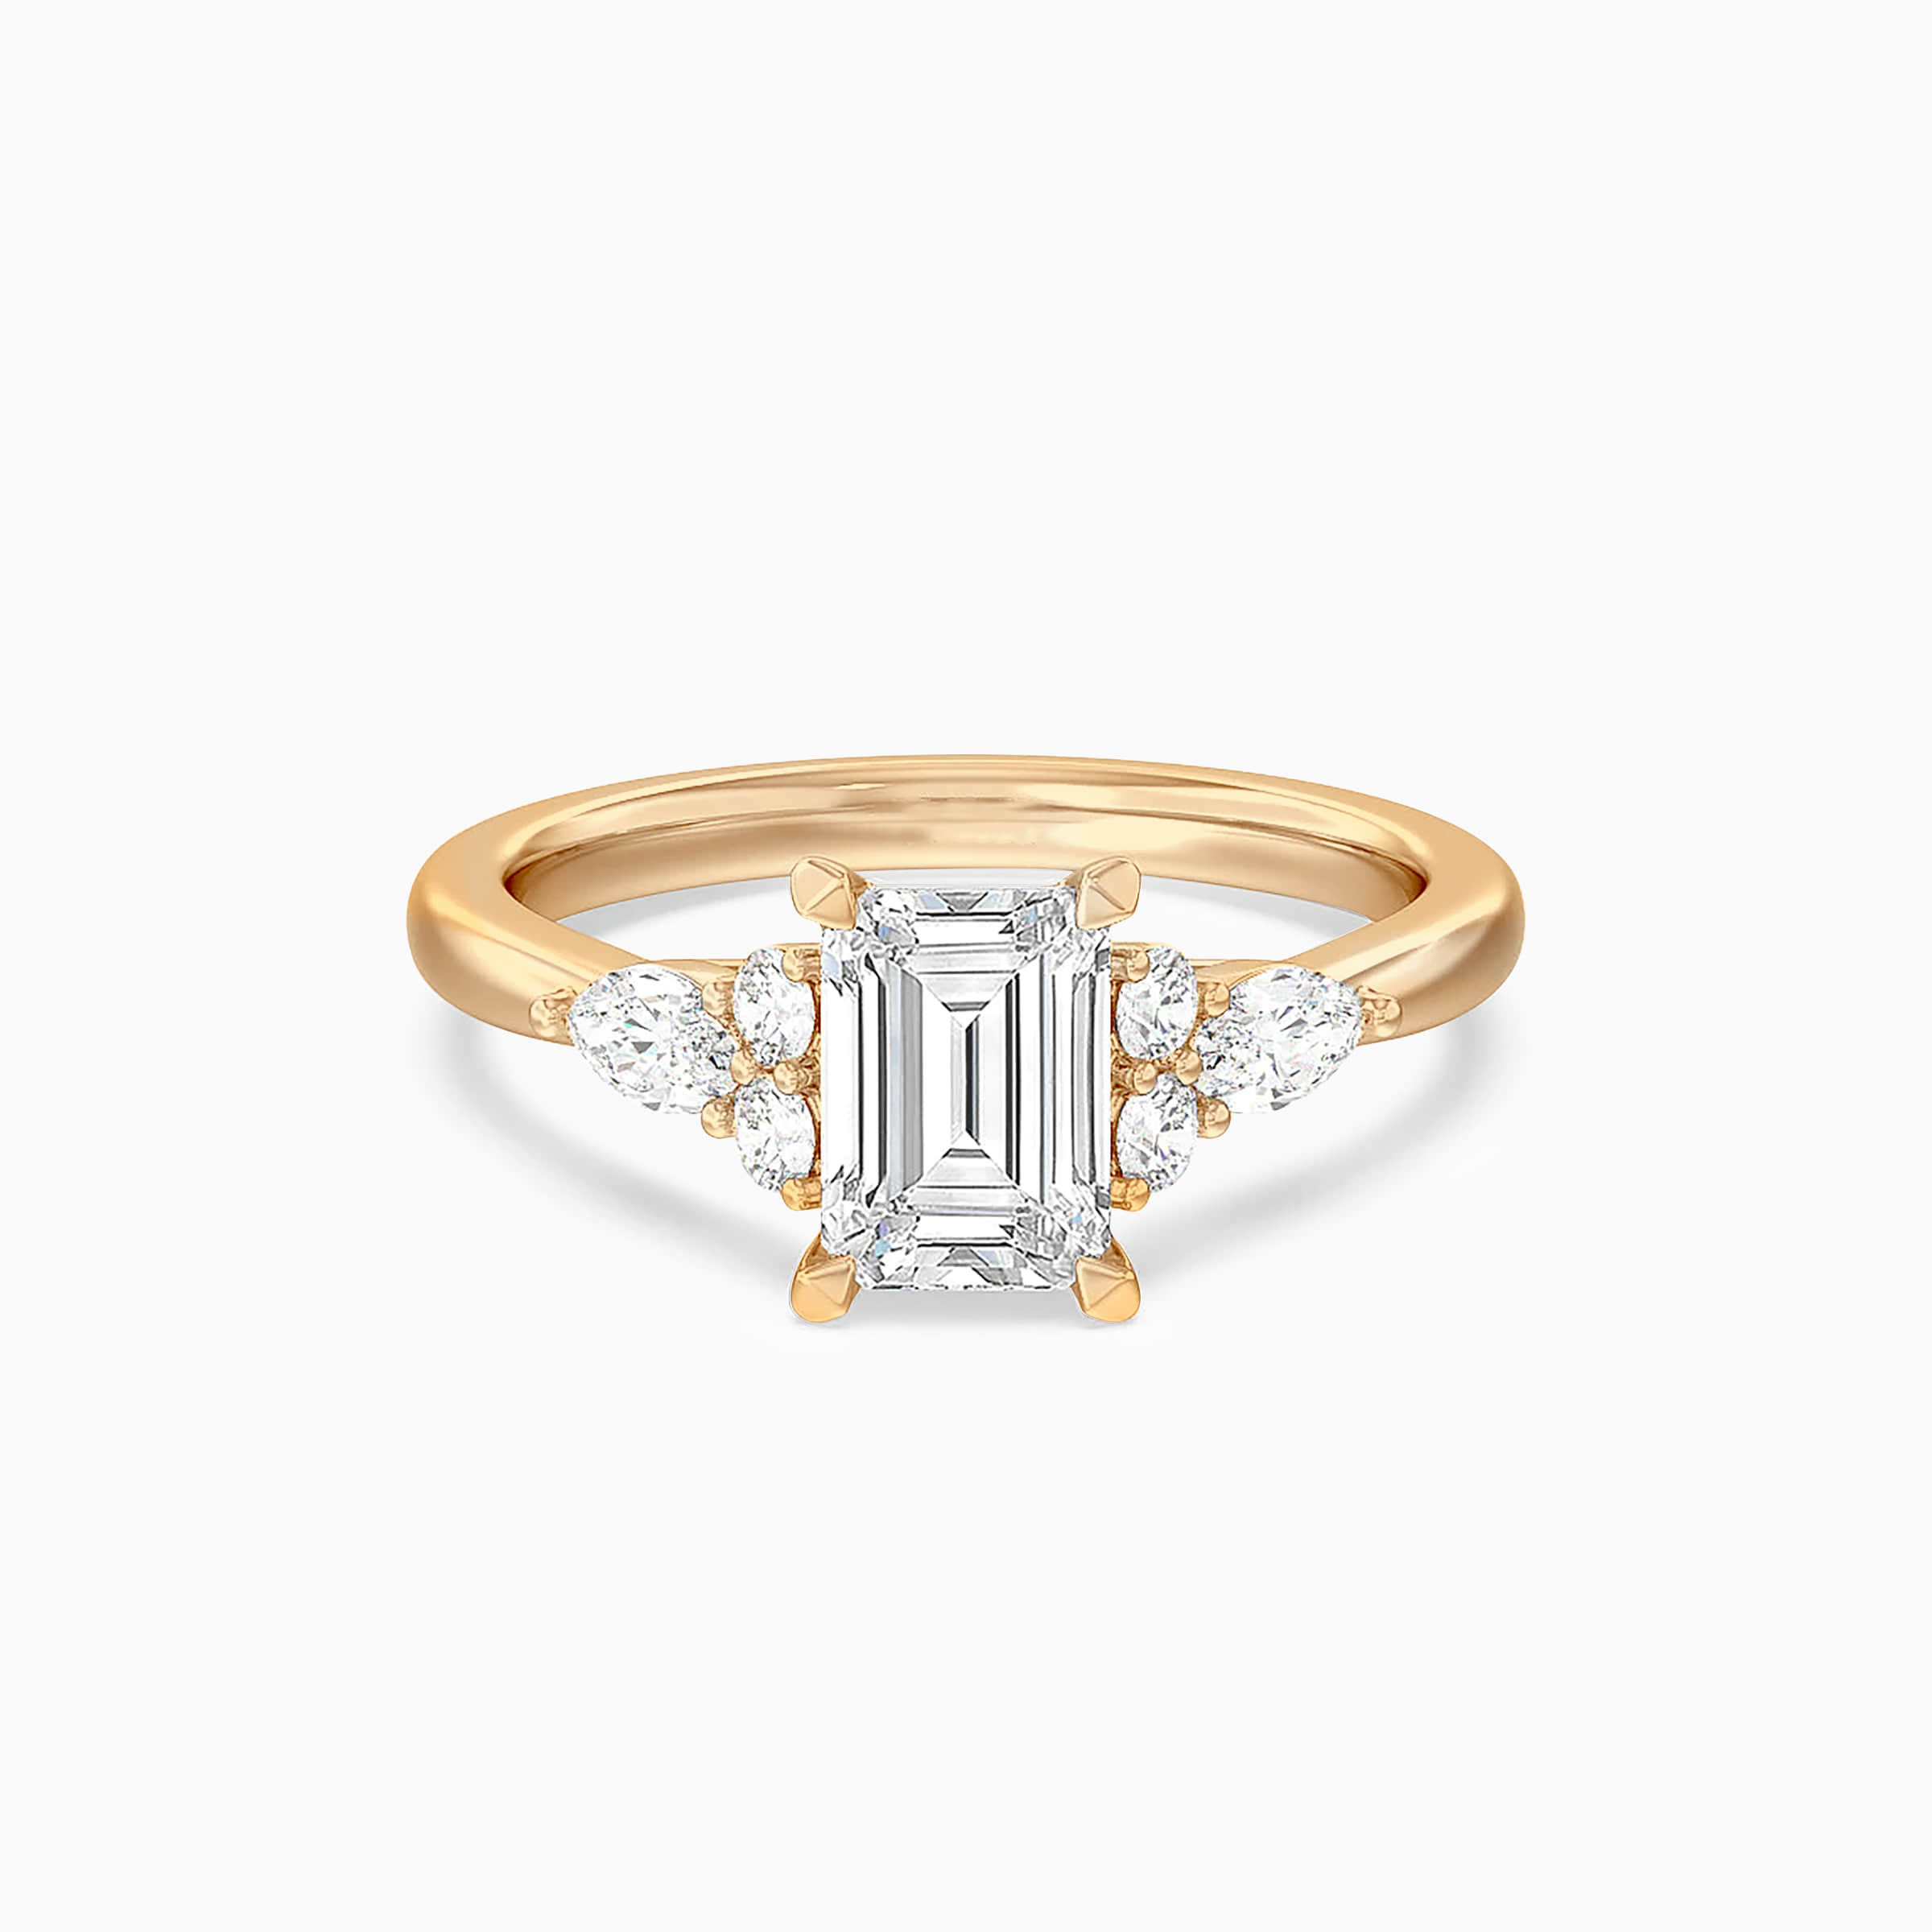 Darry Ring emerald cut engagement ring with side stones in yellow gold